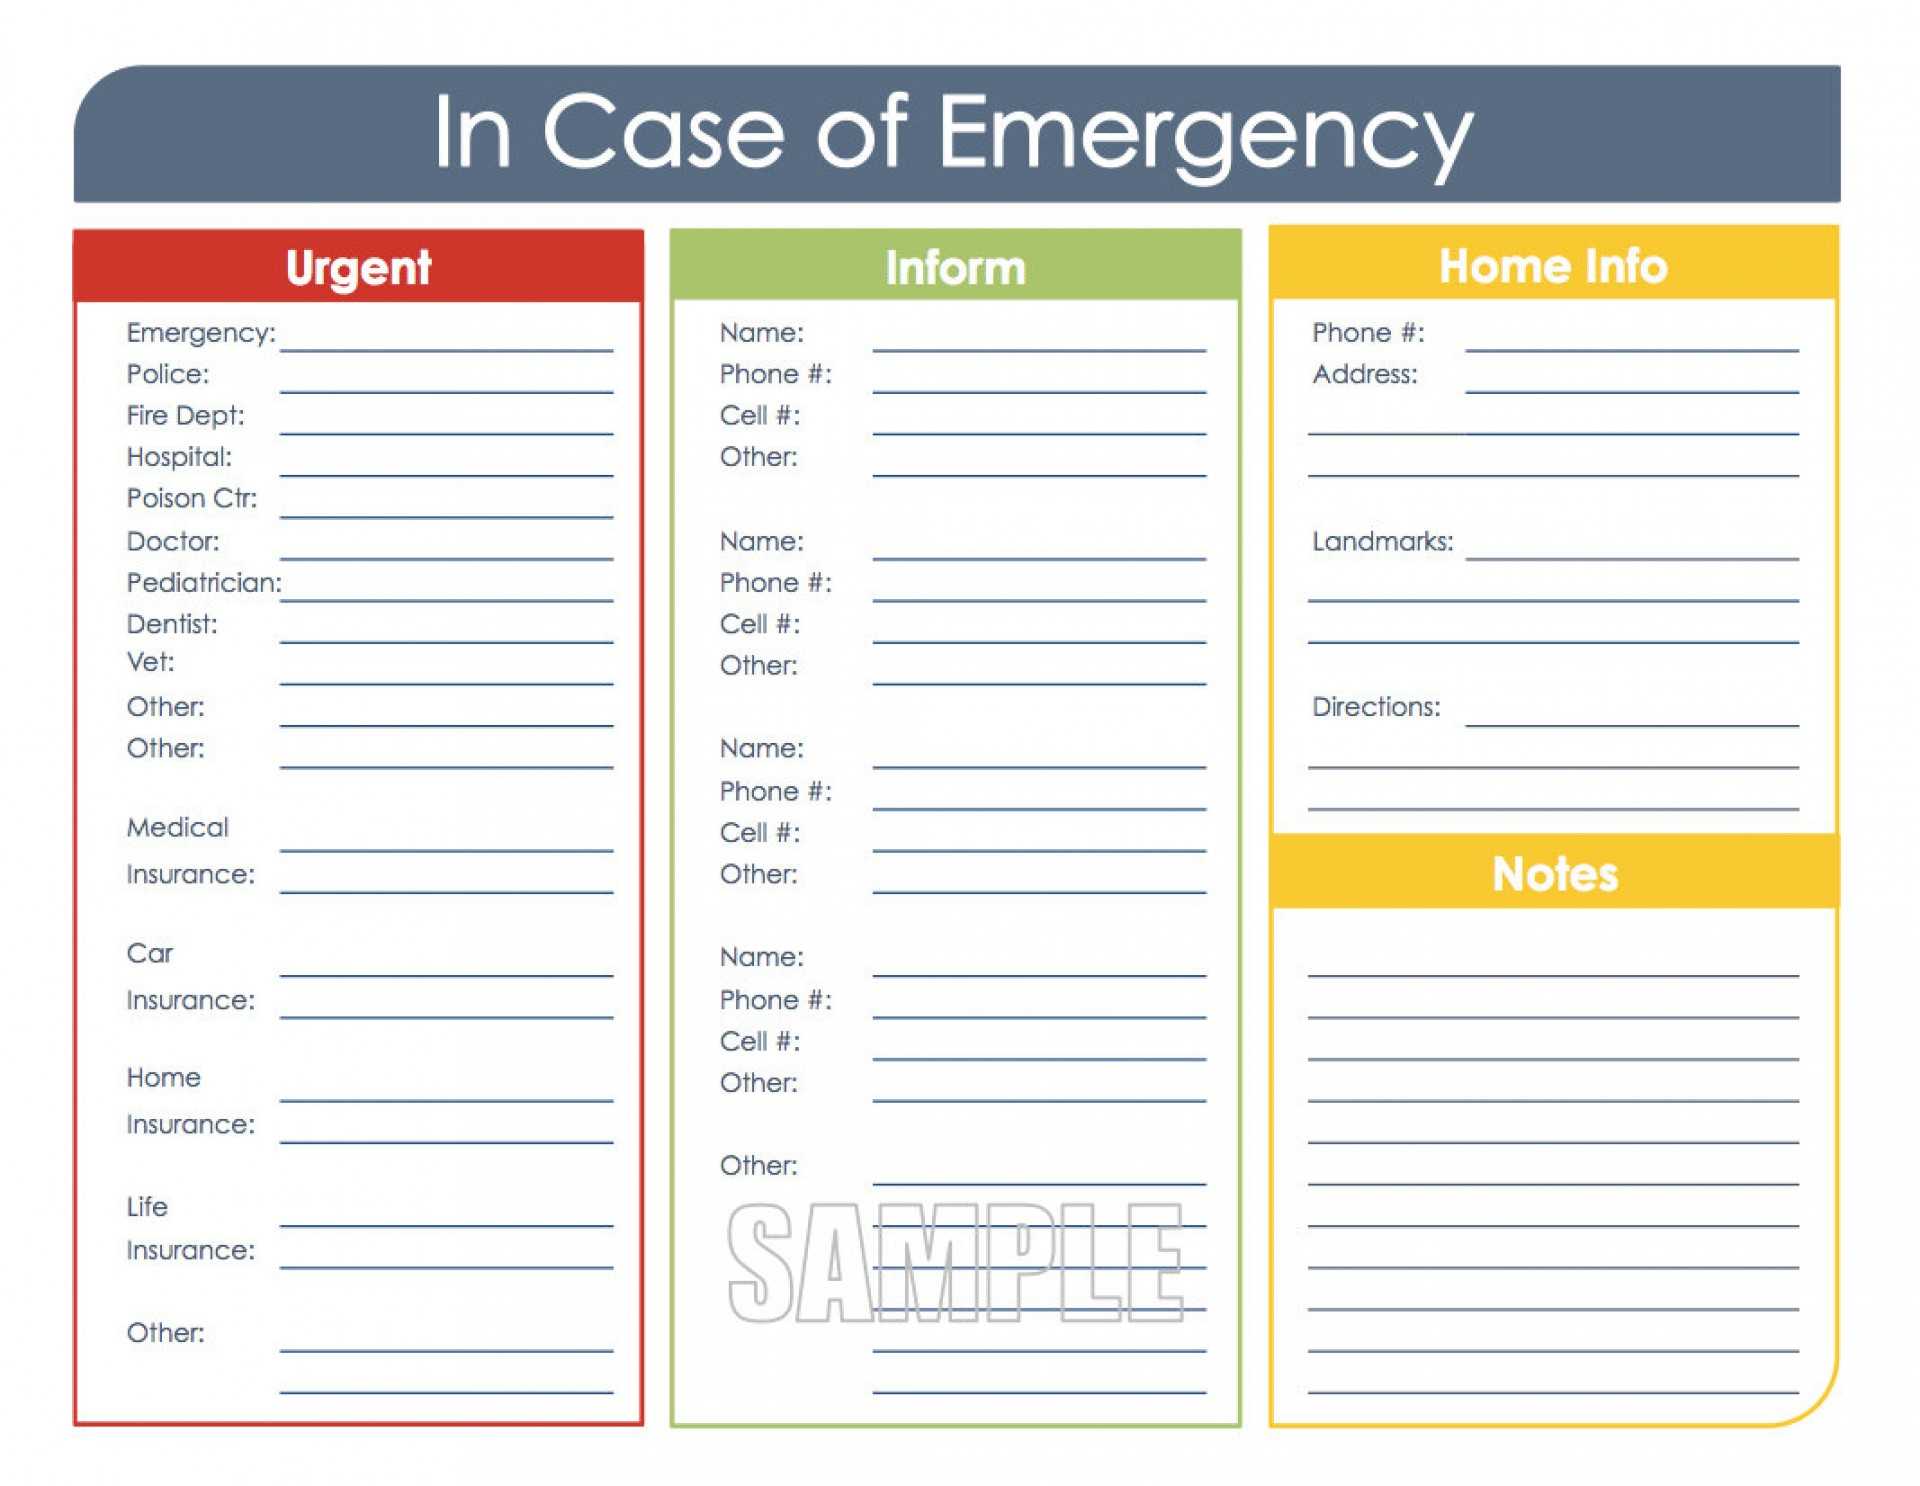 015 Template Ideas Emergency Contact Card Stunning Free Uk Intended For In Case Of Emergency Card Template